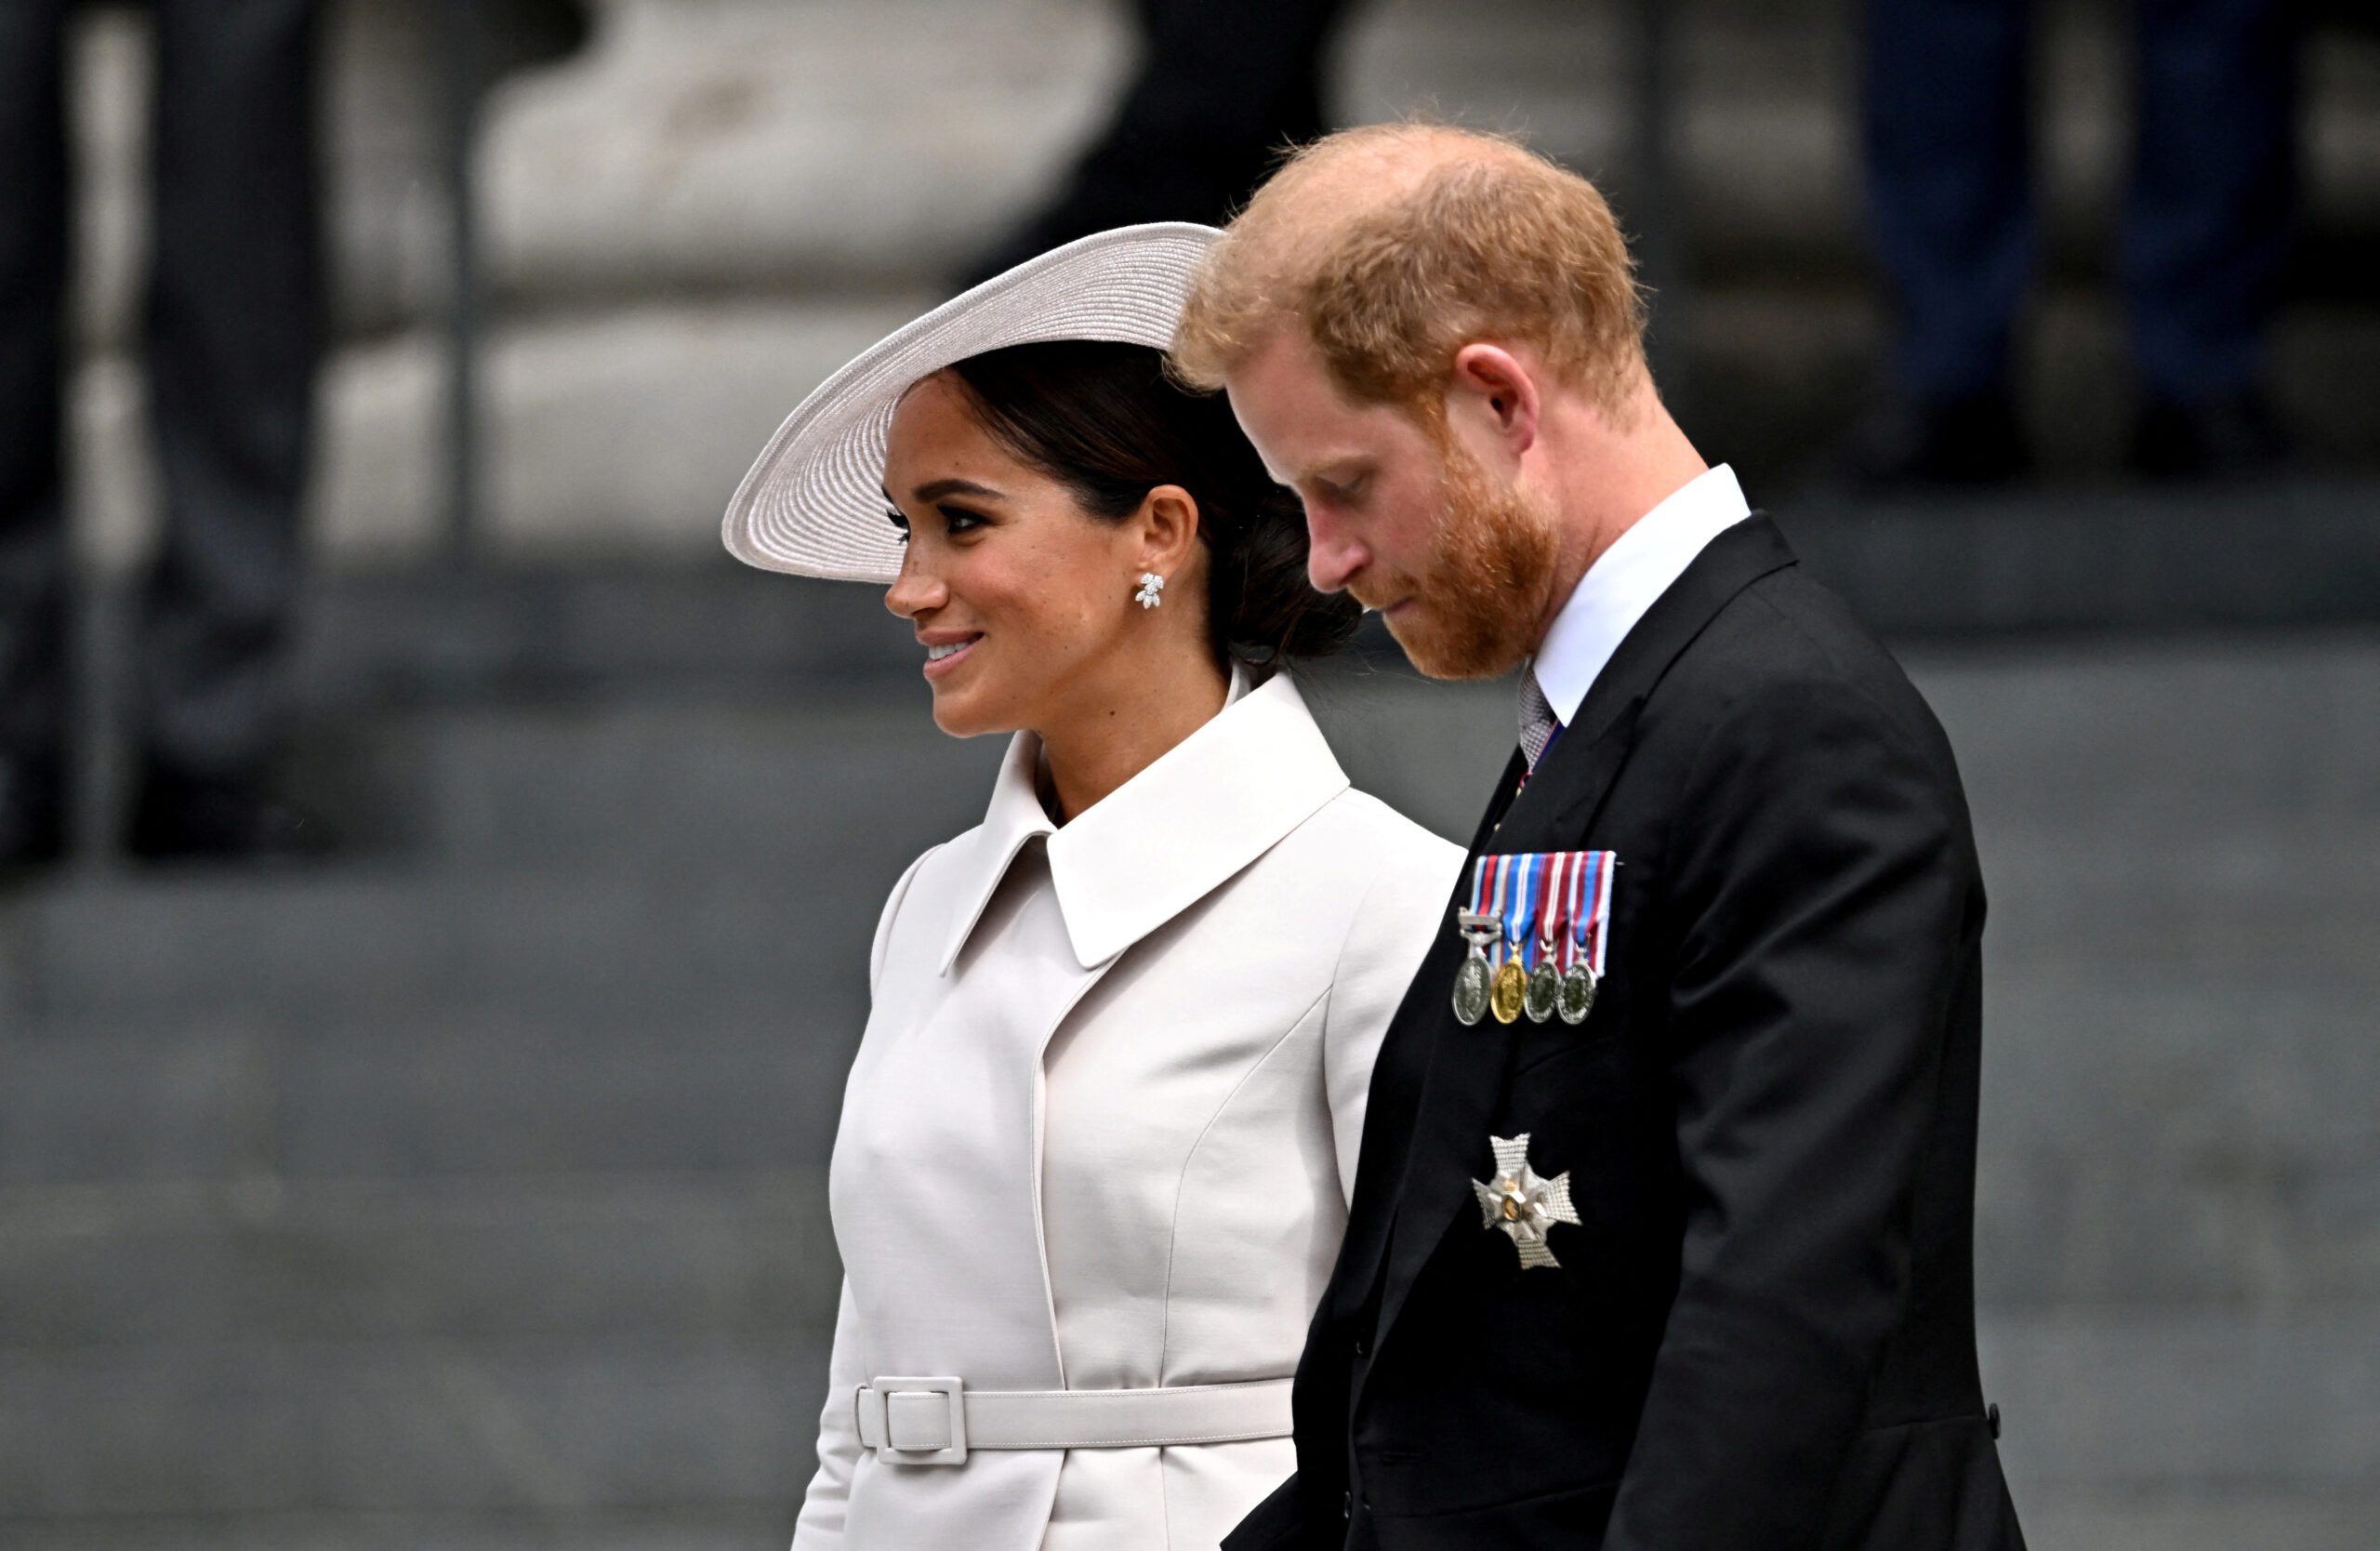 Harry and Meghan’s Netflix series wraps up – but what is the effect on the royals?